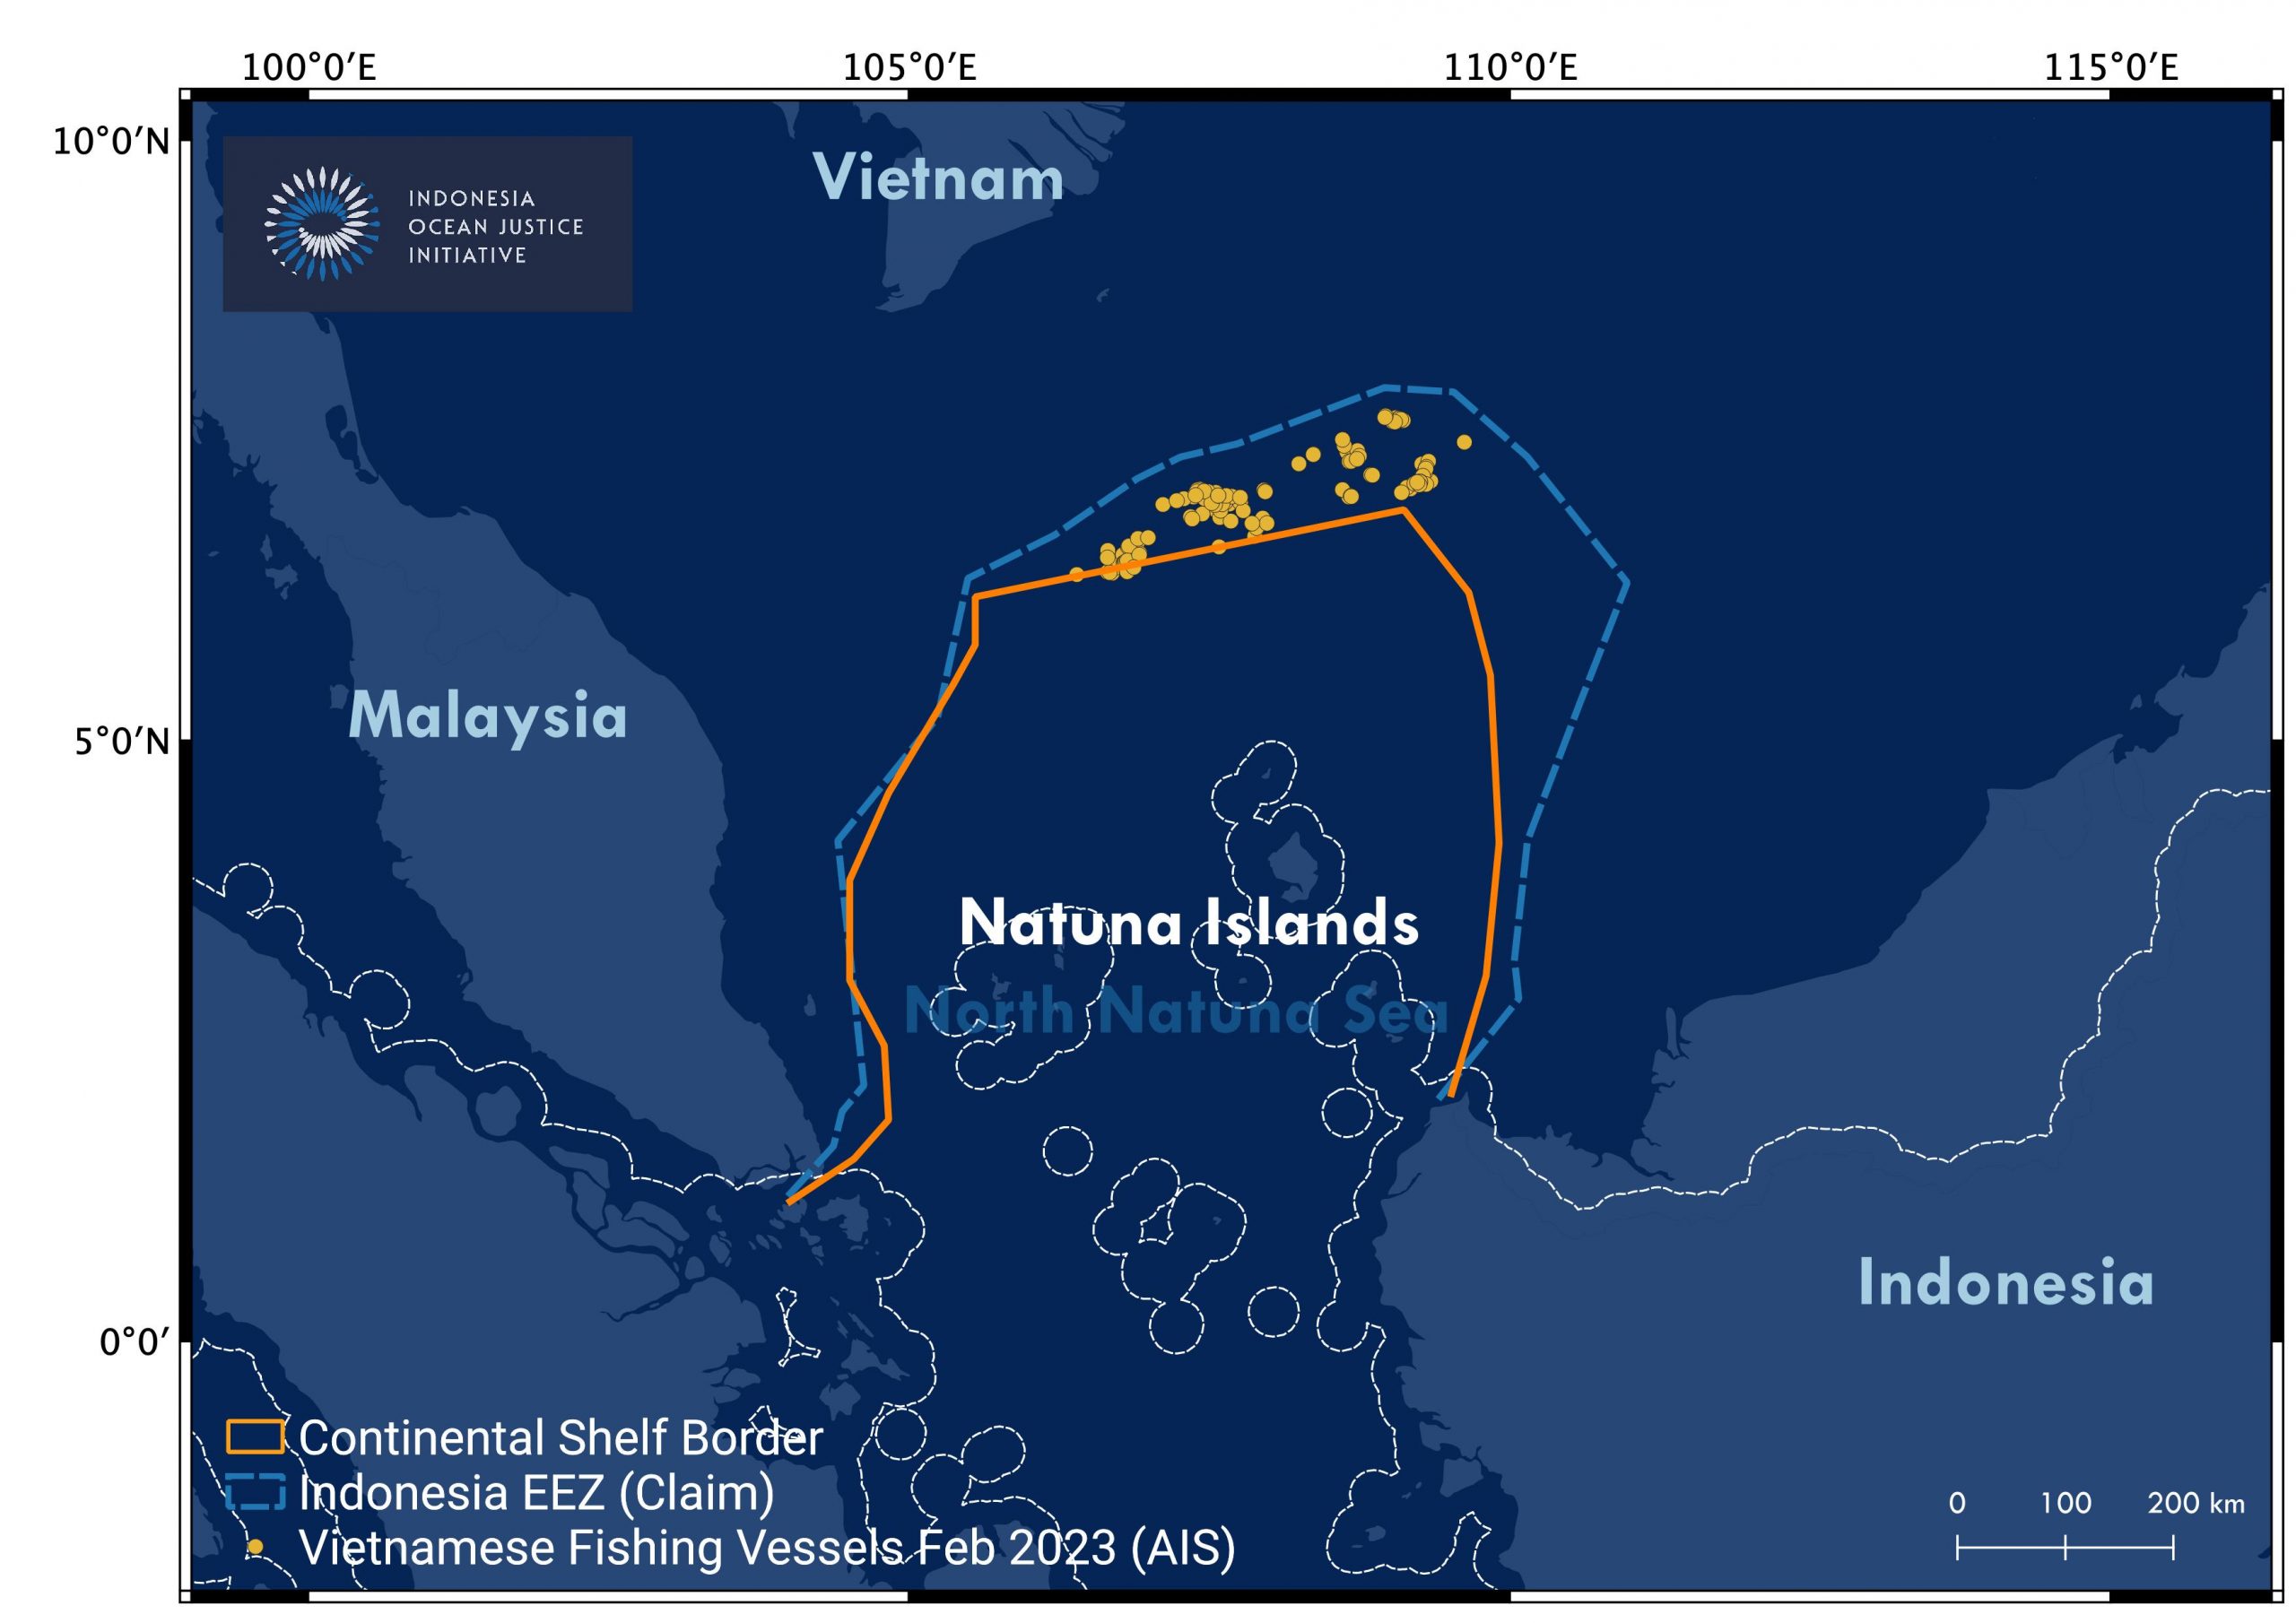 155 Vietnamese fishing vessels operate in the zone of overlapping Indonesian and Vietnamese EEZ claims in the North Natuna Sea